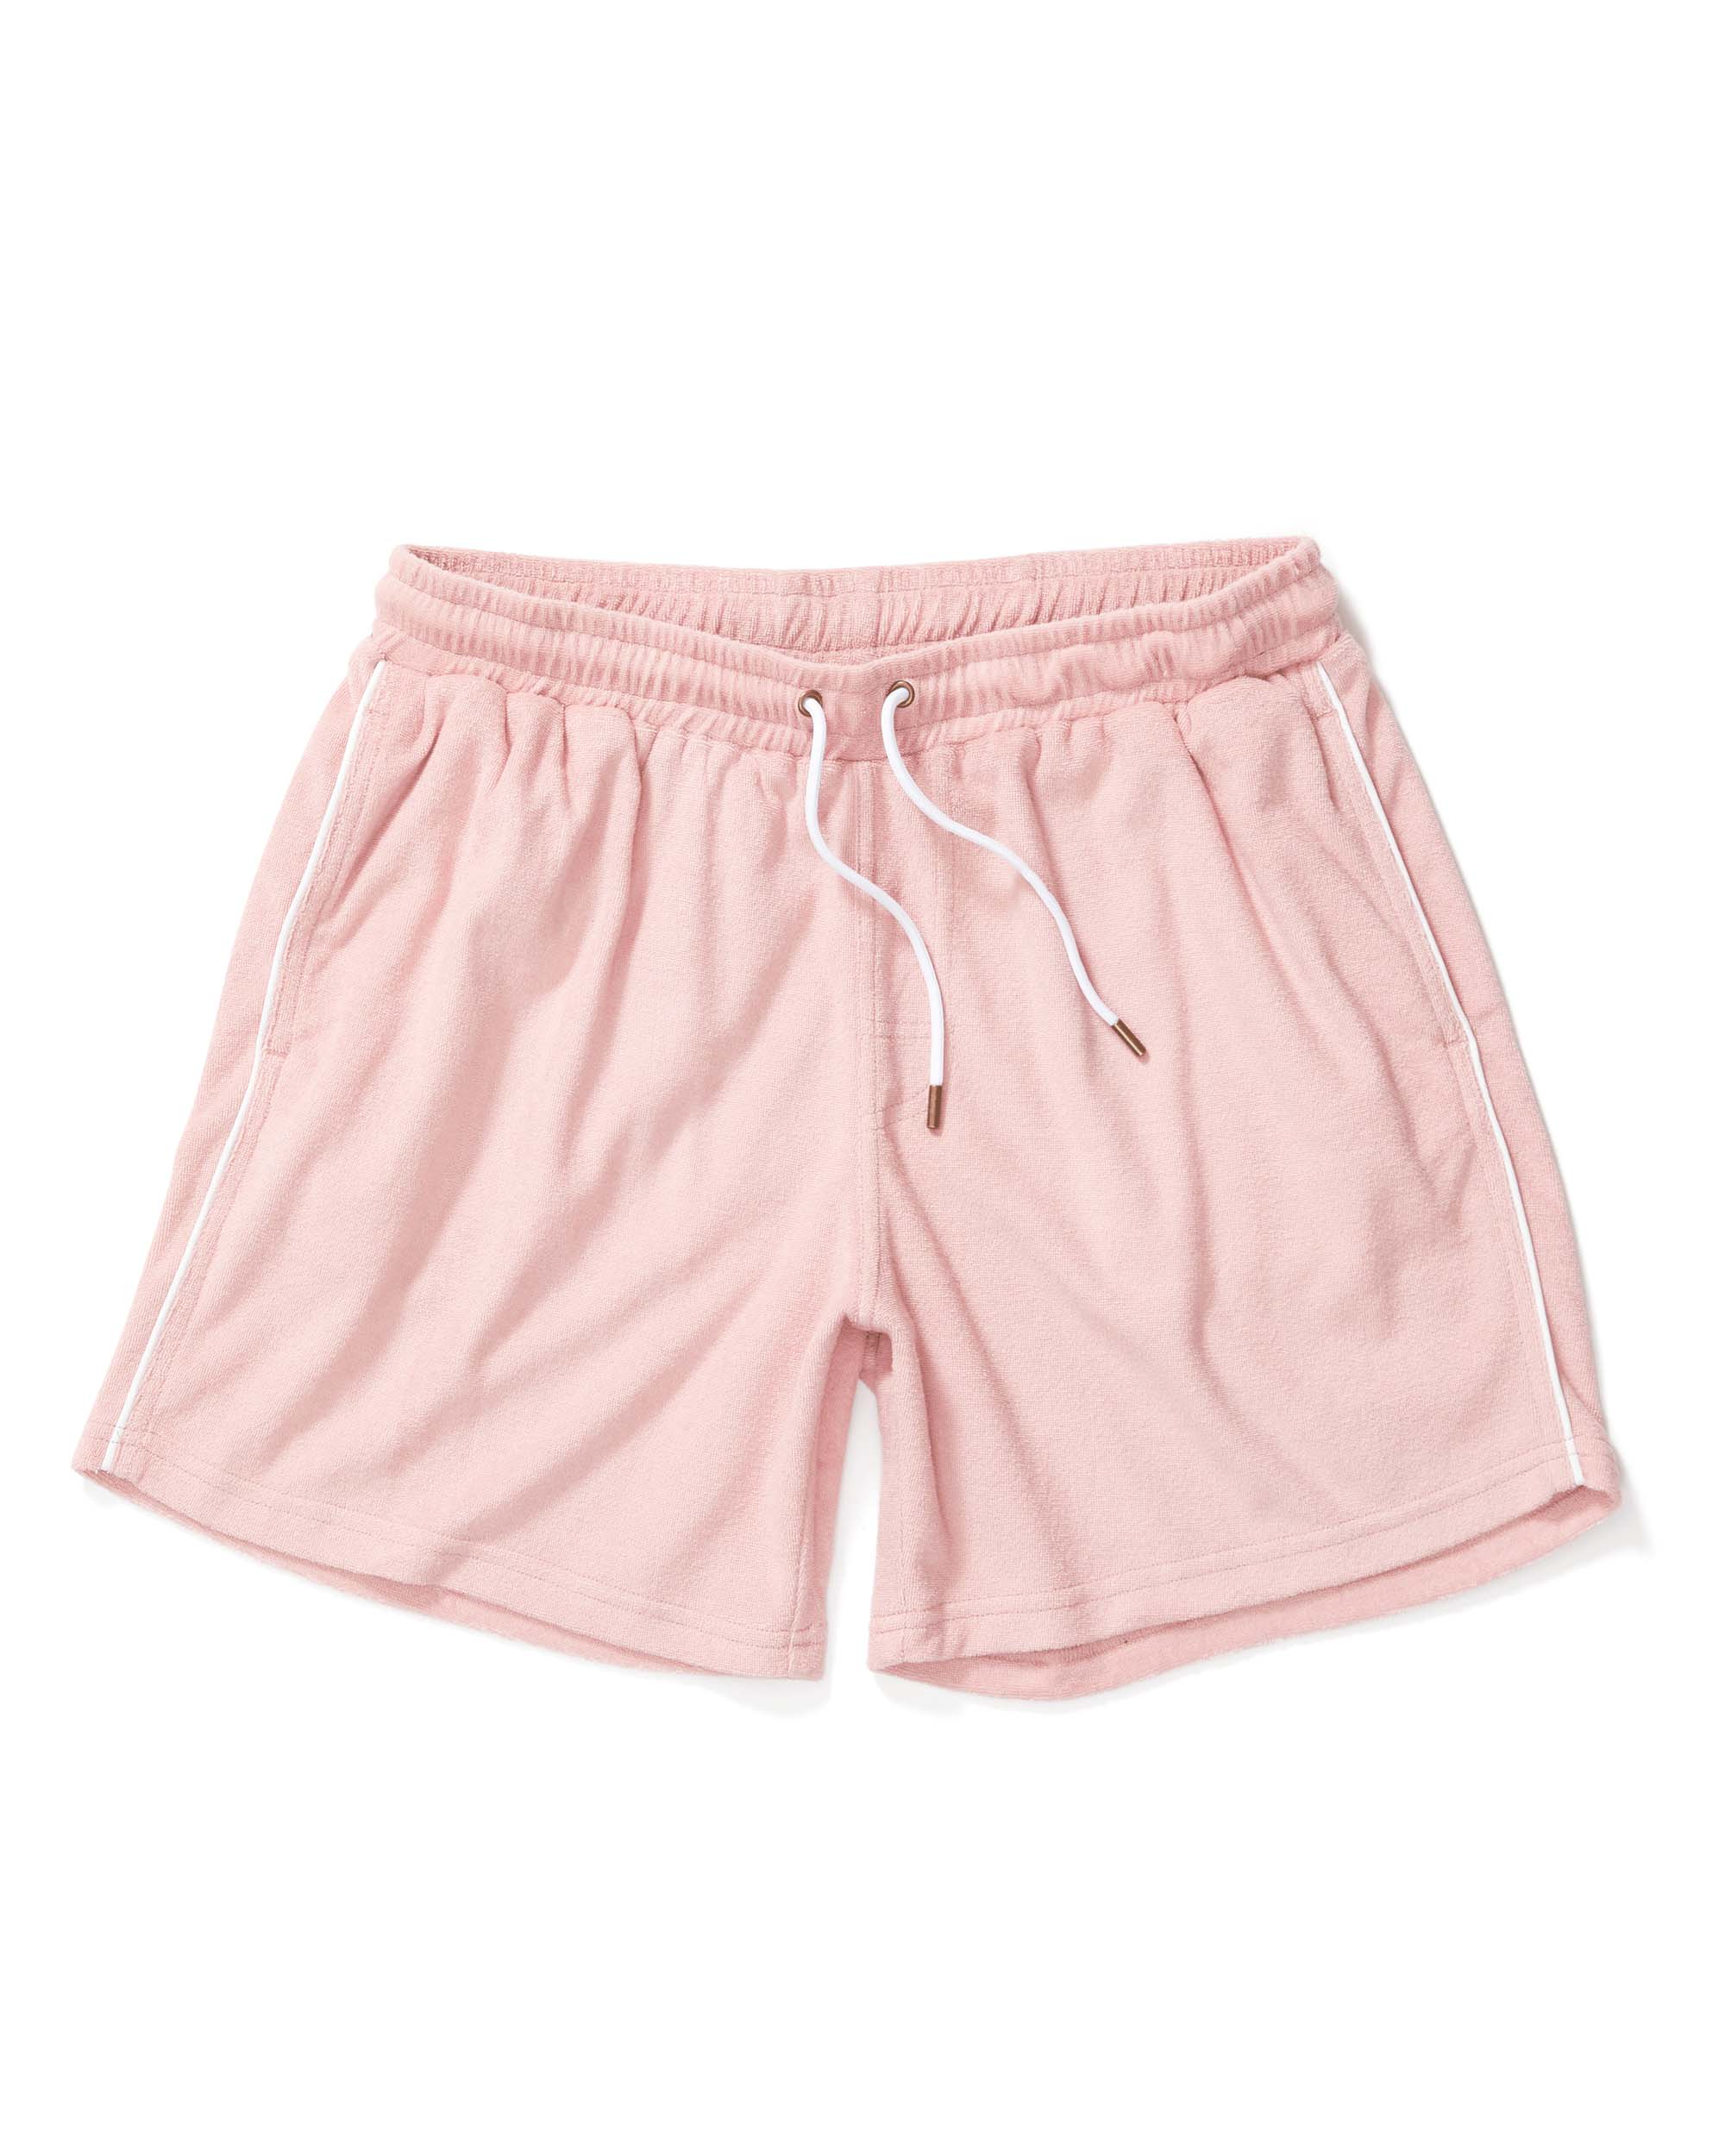 Image of The Gaucho Terry Cloth Shorts - Mauve